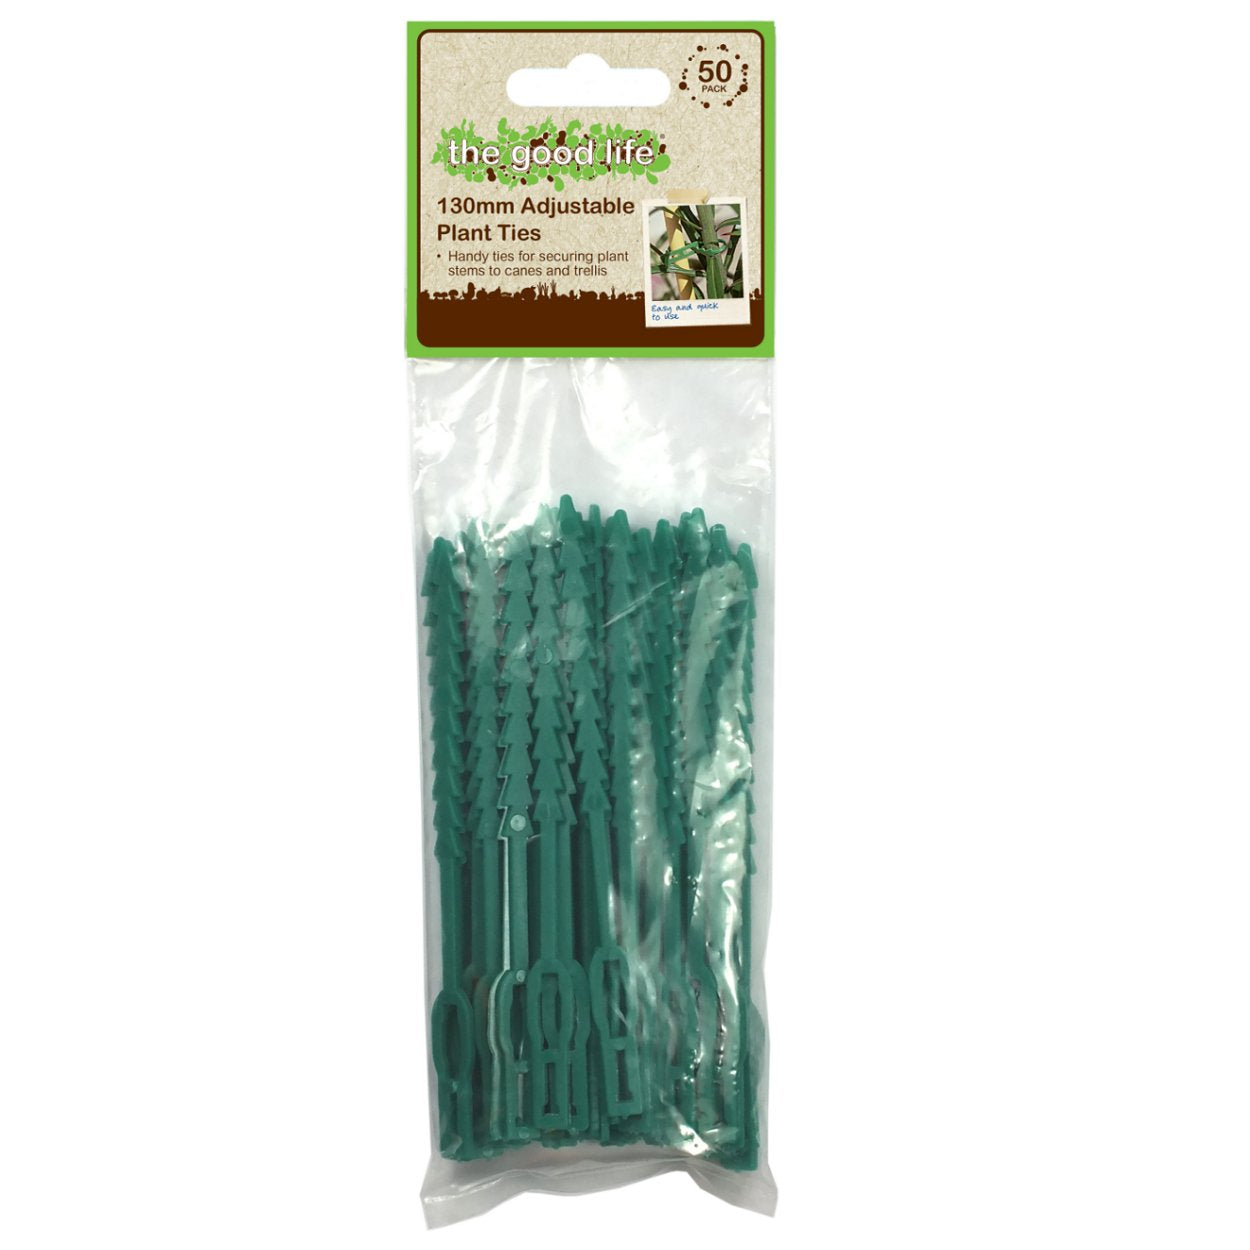 The Good Life Adjustable Plant Ties 50-Pack